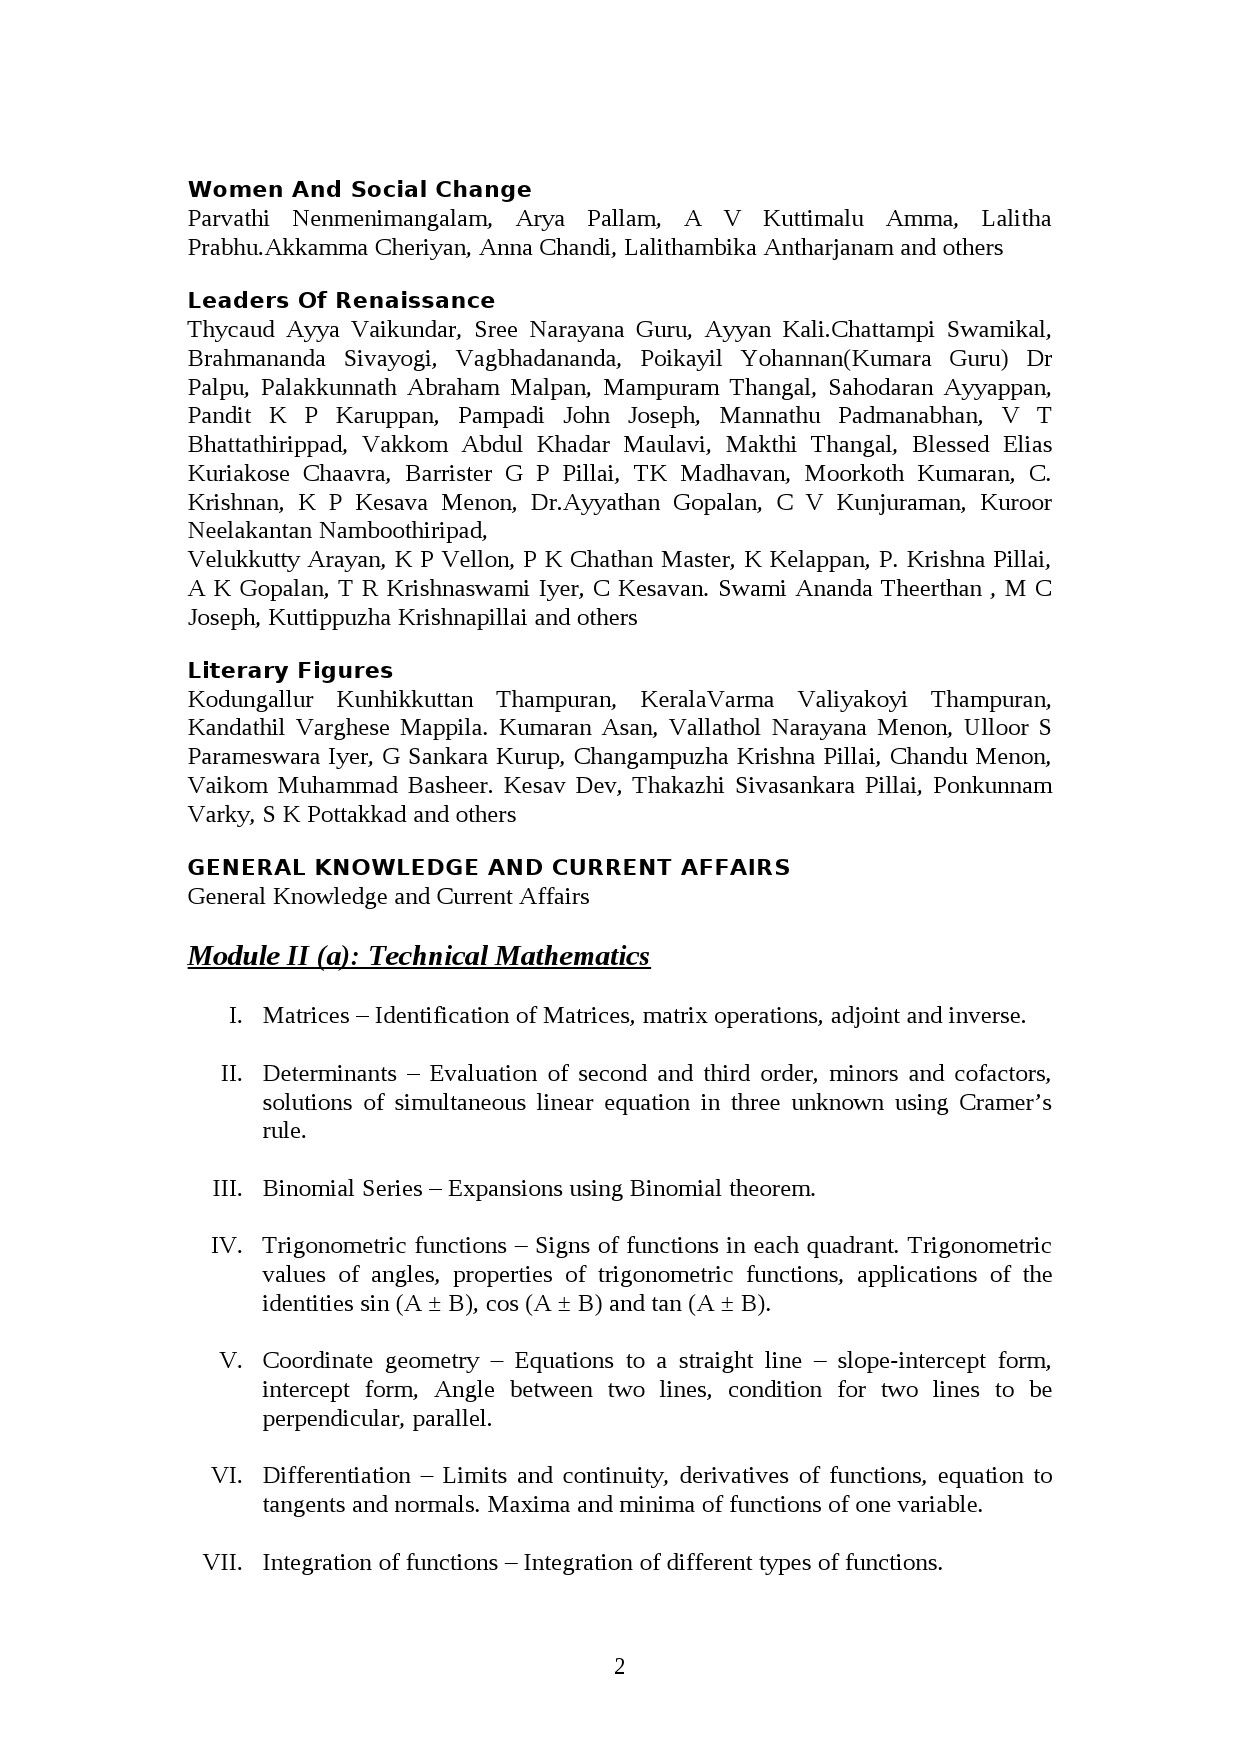 Computer Application And Business Management Lecturer in Polytechnic Syllabus - Notification Image 2